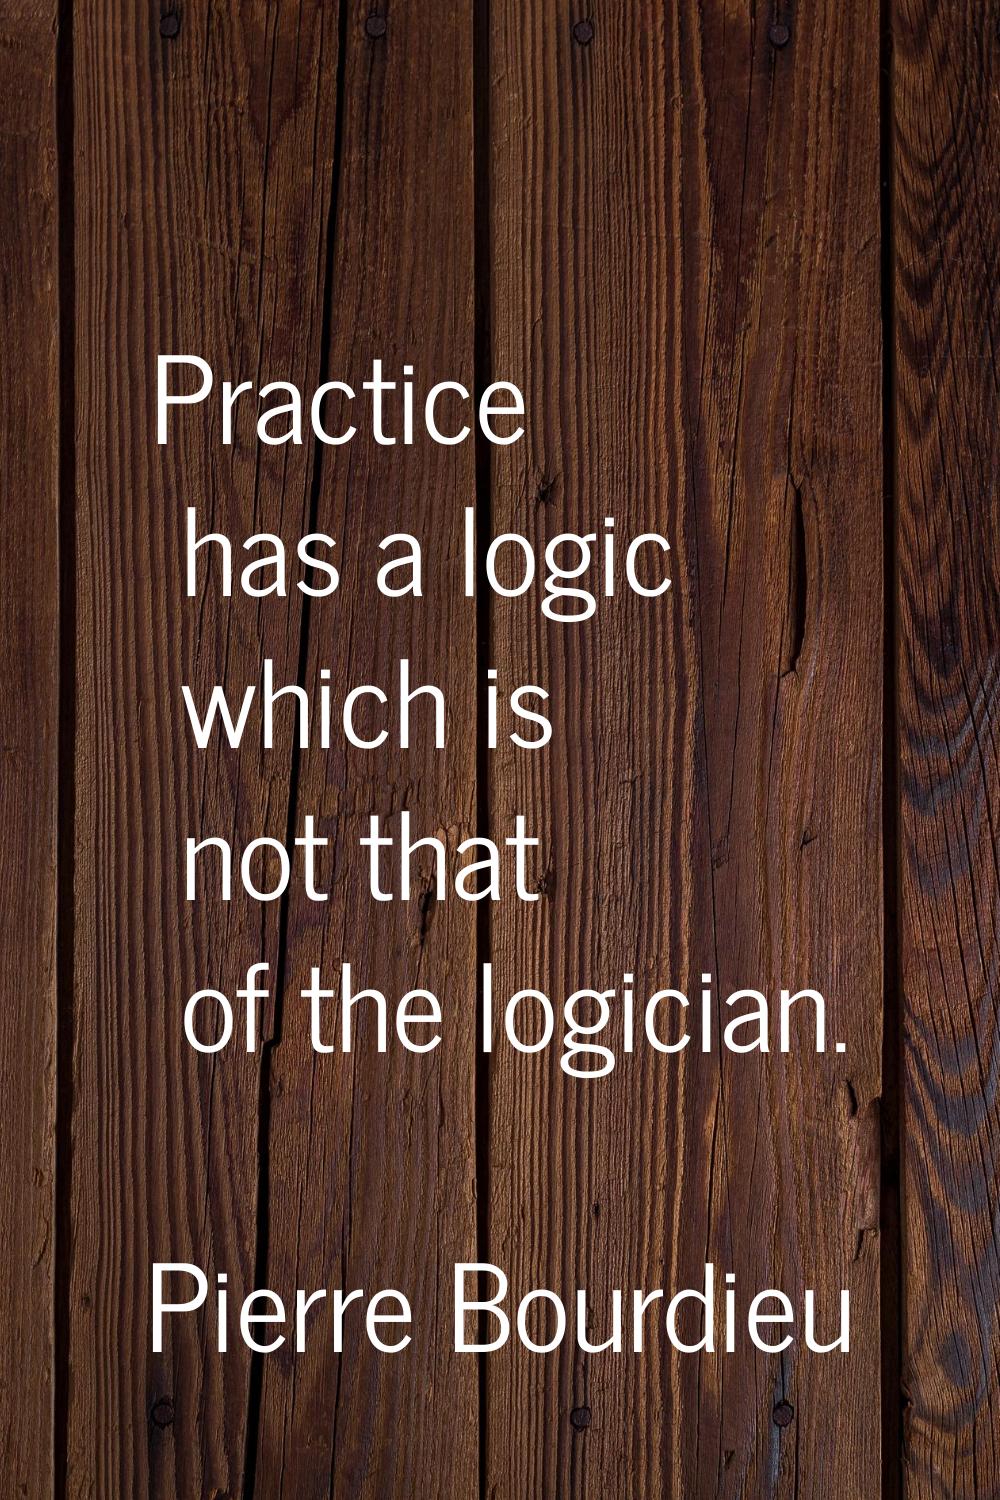 Practice has a logic which is not that of the logician.